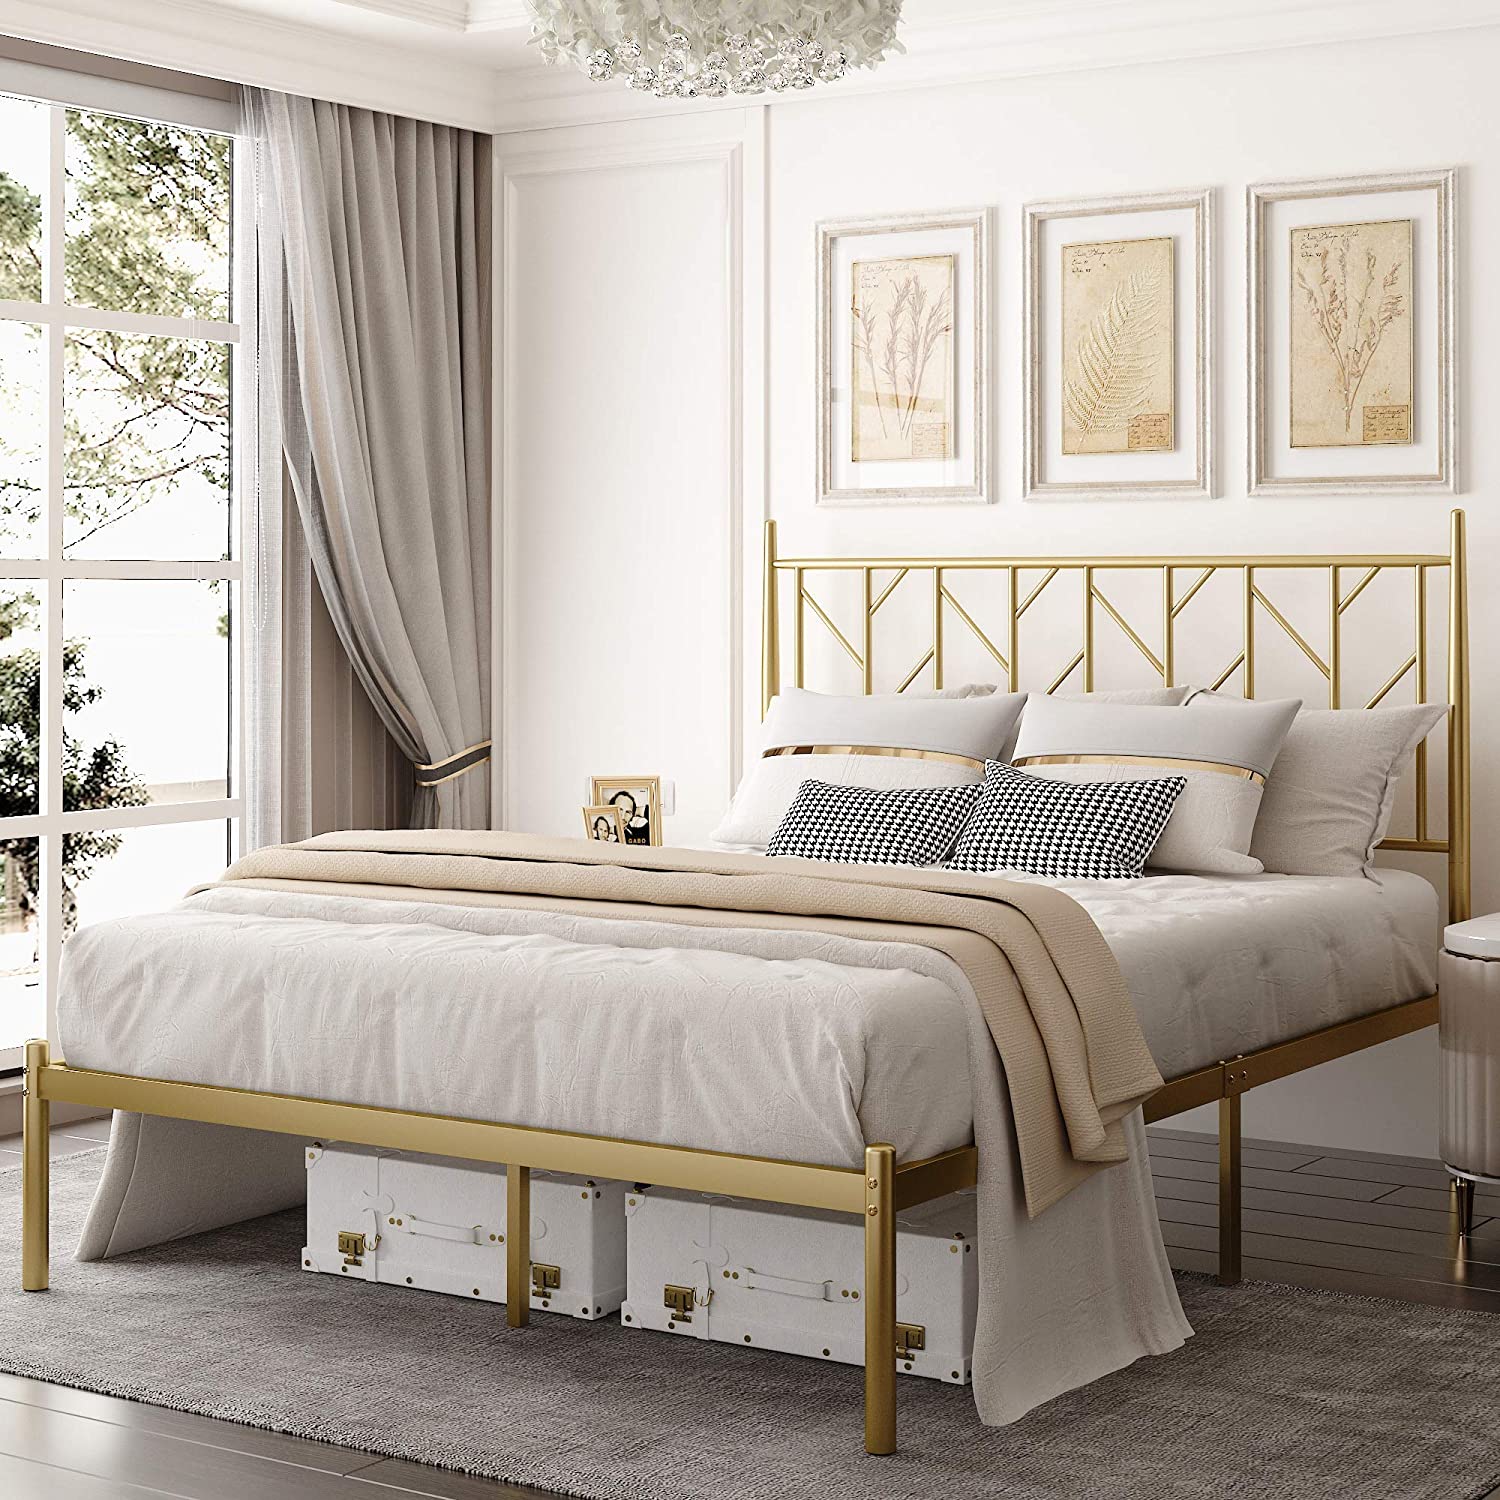 glam-bedroom-ideas-budget-bed